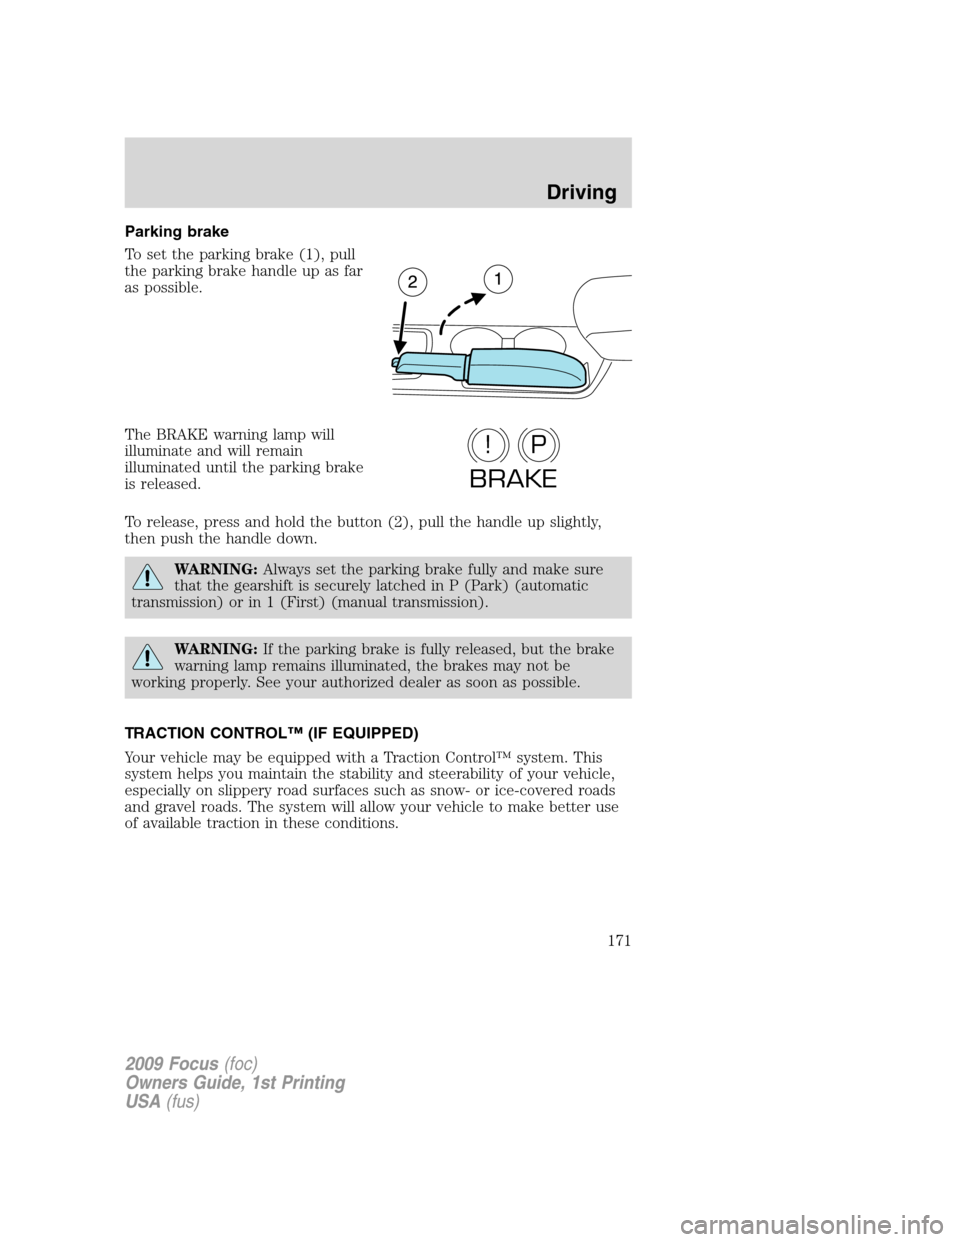 FORD FOCUS 2009 2.G Owners Manual Parking brake
To set the parking brake (1), pull
the parking brake handle up as far
as possible.
The BRAKE warning lamp will
illuminate and will remain
illuminated until the parking brake
is released.